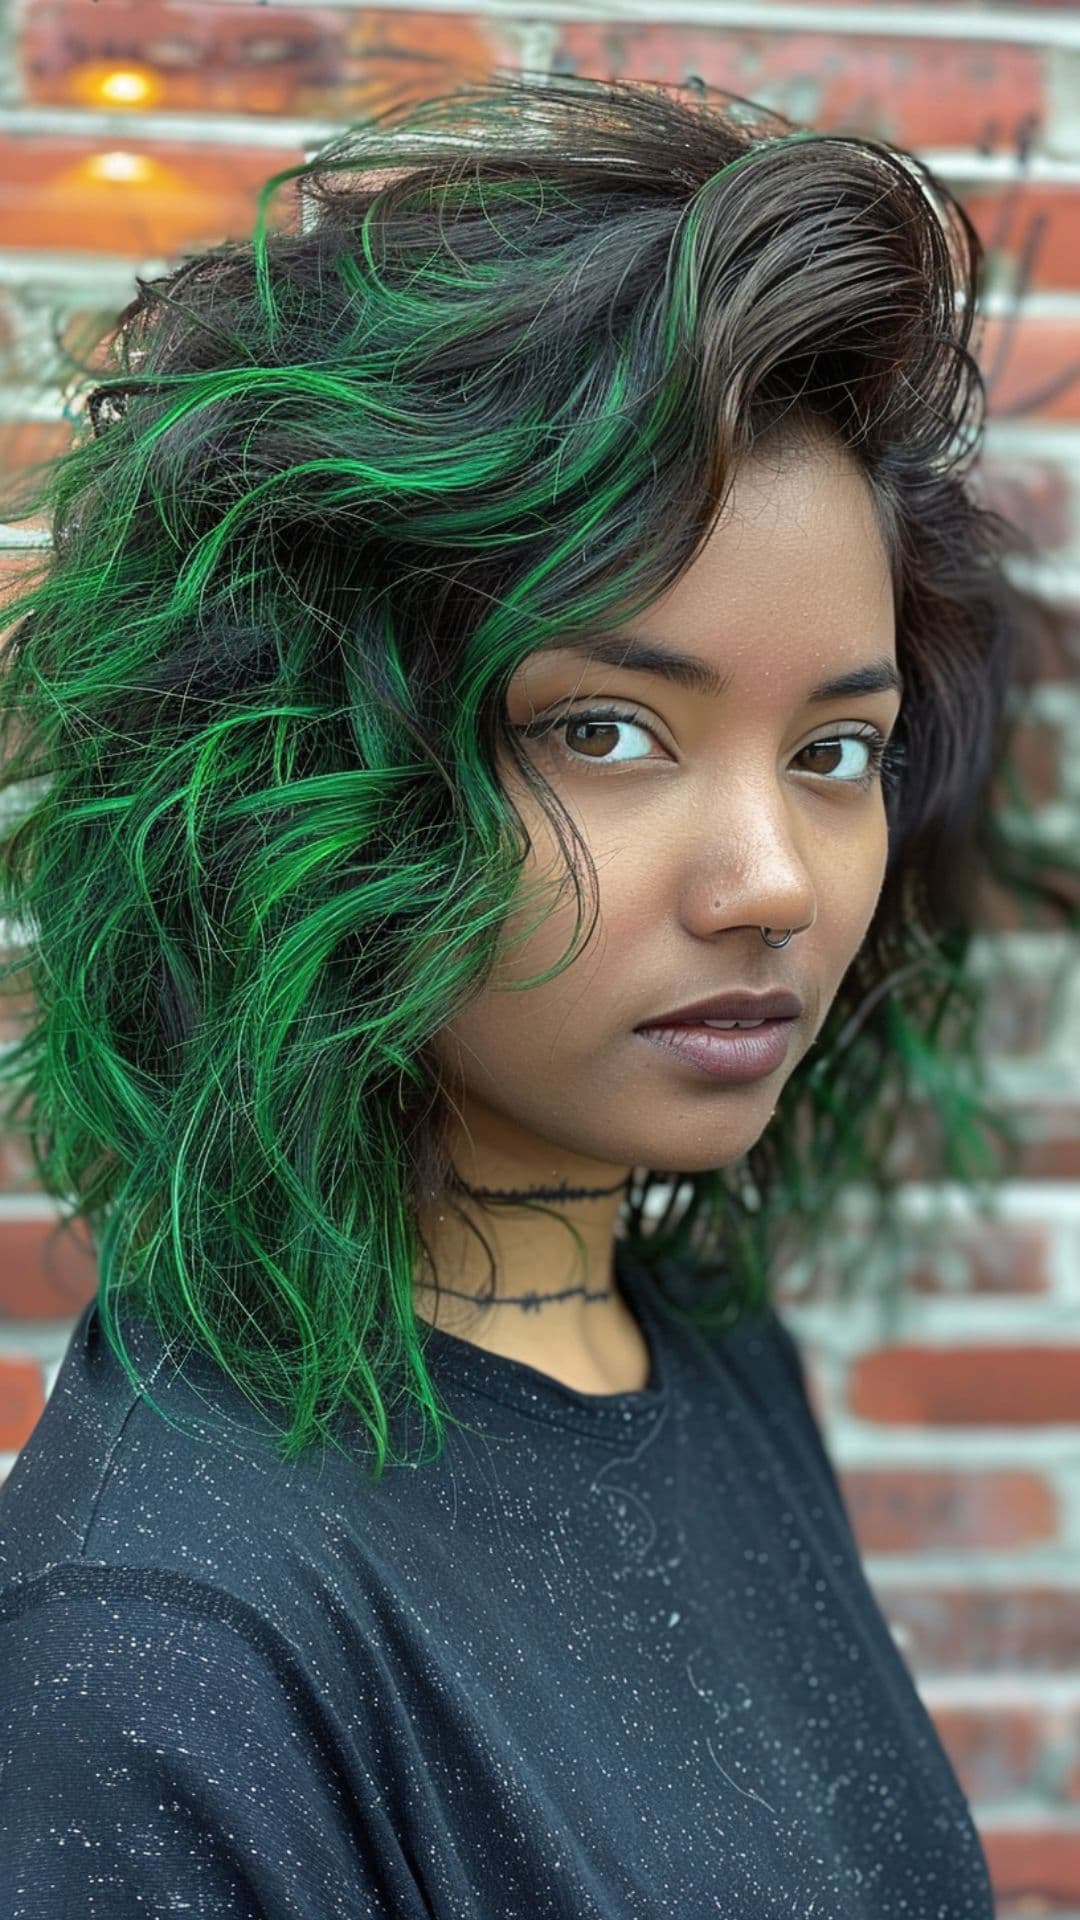 A woman modelling a black hair with green highlights.